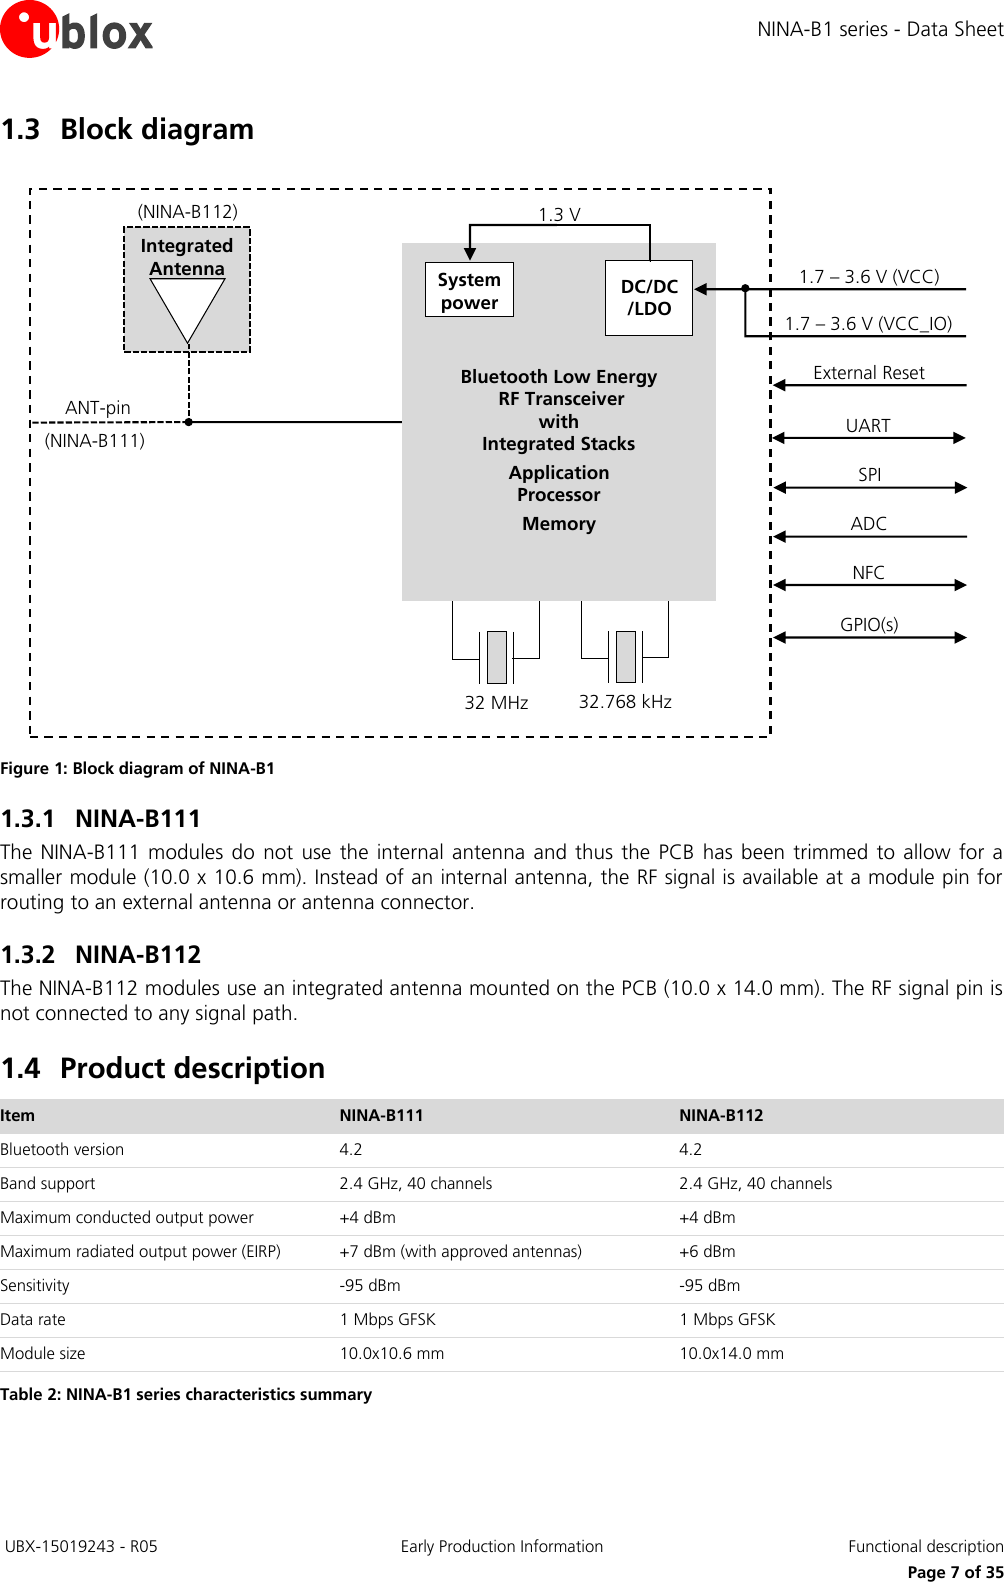 NINA-B1 series - Data Sheet  UBX-15019243 - R05 Early Production Information  Functional description     Page 7 of 35 1.3 Block diagram  Figure 1: Block diagram of NINA-B1 1.3.1 NINA-B111 The  NINA-B111  modules  do  not  use  the  internal antenna and thus the PCB  has  been trimmed  to  allow for  a smaller module (10.0 x 10.6 mm). Instead of an internal antenna, the RF signal is available at a module pin for routing to an external antenna or antenna connector. 1.3.2 NINA-B112 The NINA-B112 modules use an integrated antenna mounted on the PCB (10.0 x 14.0 mm). The RF signal pin is not connected to any signal path. 1.4 Product description Item NINA-B111 NINA-B112 Bluetooth version 4.2 4.2 Band support 2.4 GHz, 40 channels 2.4 GHz, 40 channels Maximum conducted output power +4 dBm +4 dBm Maximum radiated output power (EIRP) +7 dBm (with approved antennas) +6 dBm Sensitivity -95 dBm -95 dBm Data rate 1 Mbps GFSK 1 Mbps GFSK Module size 10.0x10.6 mm 10.0x14.0 mm Table 2: NINA-B1 series characteristics summary  32.768 kHz Integrated Antenna 1.7 – 3.6 V (VCC_IO) External Reset UART SPI ADC NFC     Bluetooth Low Energy  RF Transceiver with Integrated Stacks Application Processor Memory 32 MHz DC/DC /LDO System power 1.3 V ANT-pin 1.7 – 3.6 V (VCC) (NINA-B111) (NINA-B112) GPIO(s) 